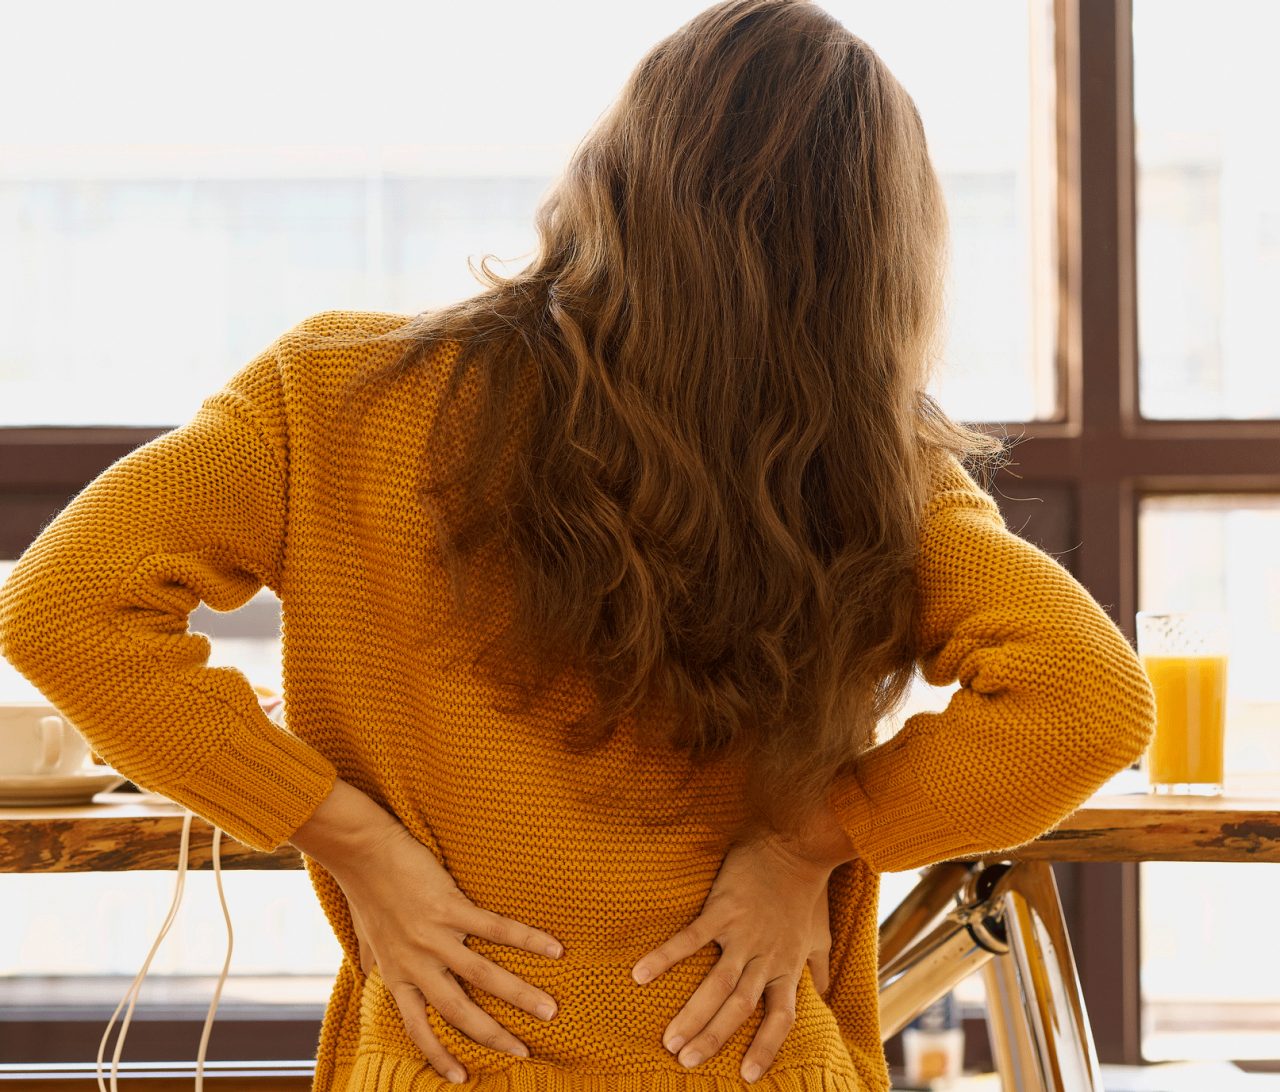 Your Diet May Be Causing Your Back Pain